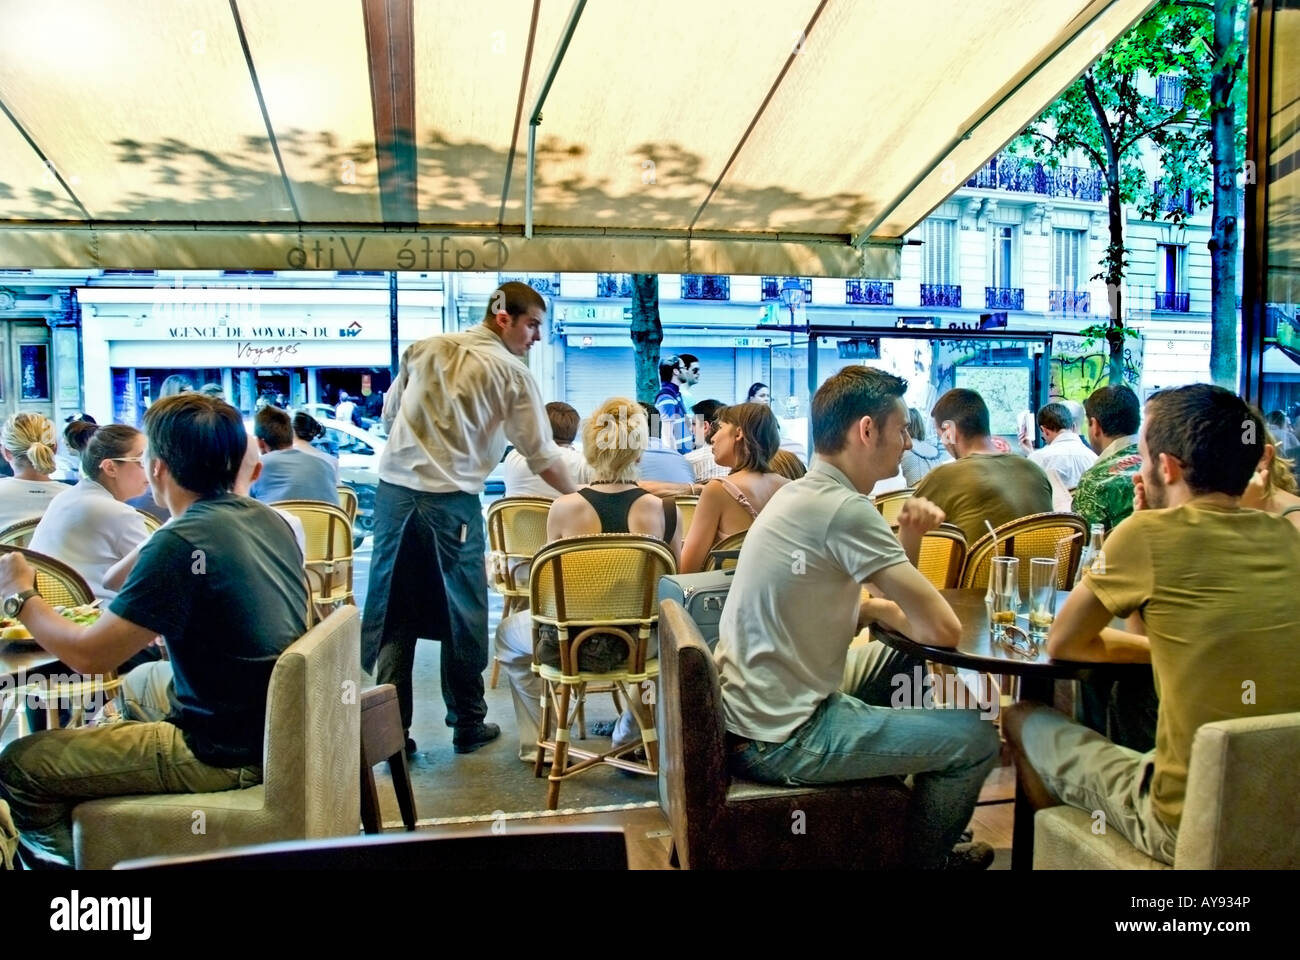 Paris France, Crowd of People, Terrace, French Cafe, Bistro Restaurant Sidewalk terrace Tables, in the Le Marais District,  'Caffe Vito' crowded Stock Photo